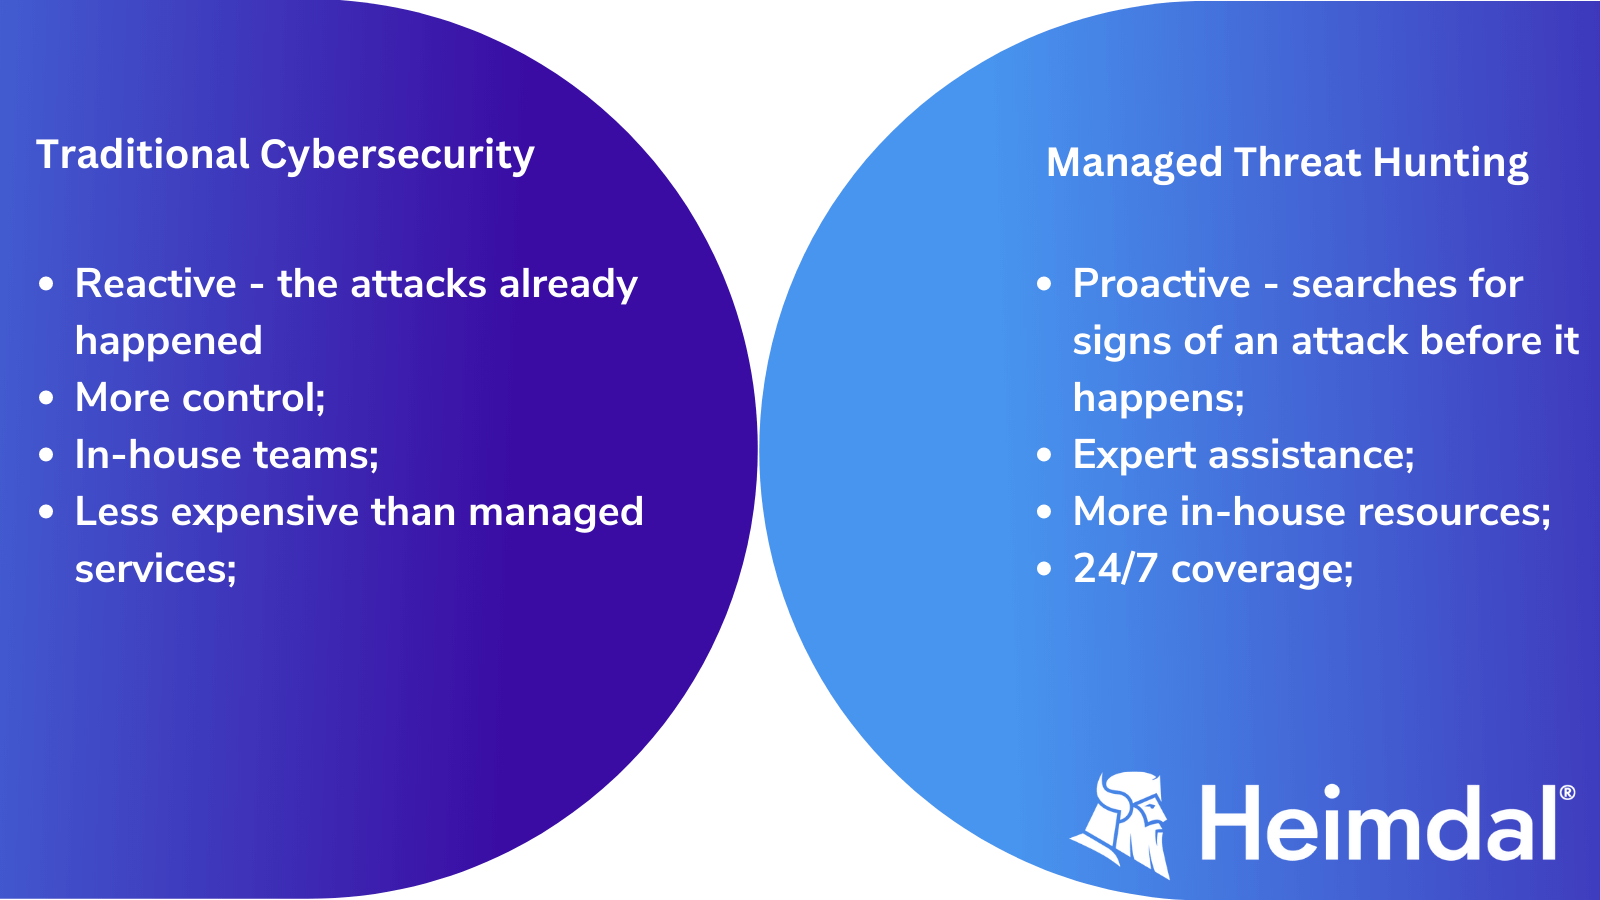 Traditional Cybersecurity vs Managed Threat Hunting